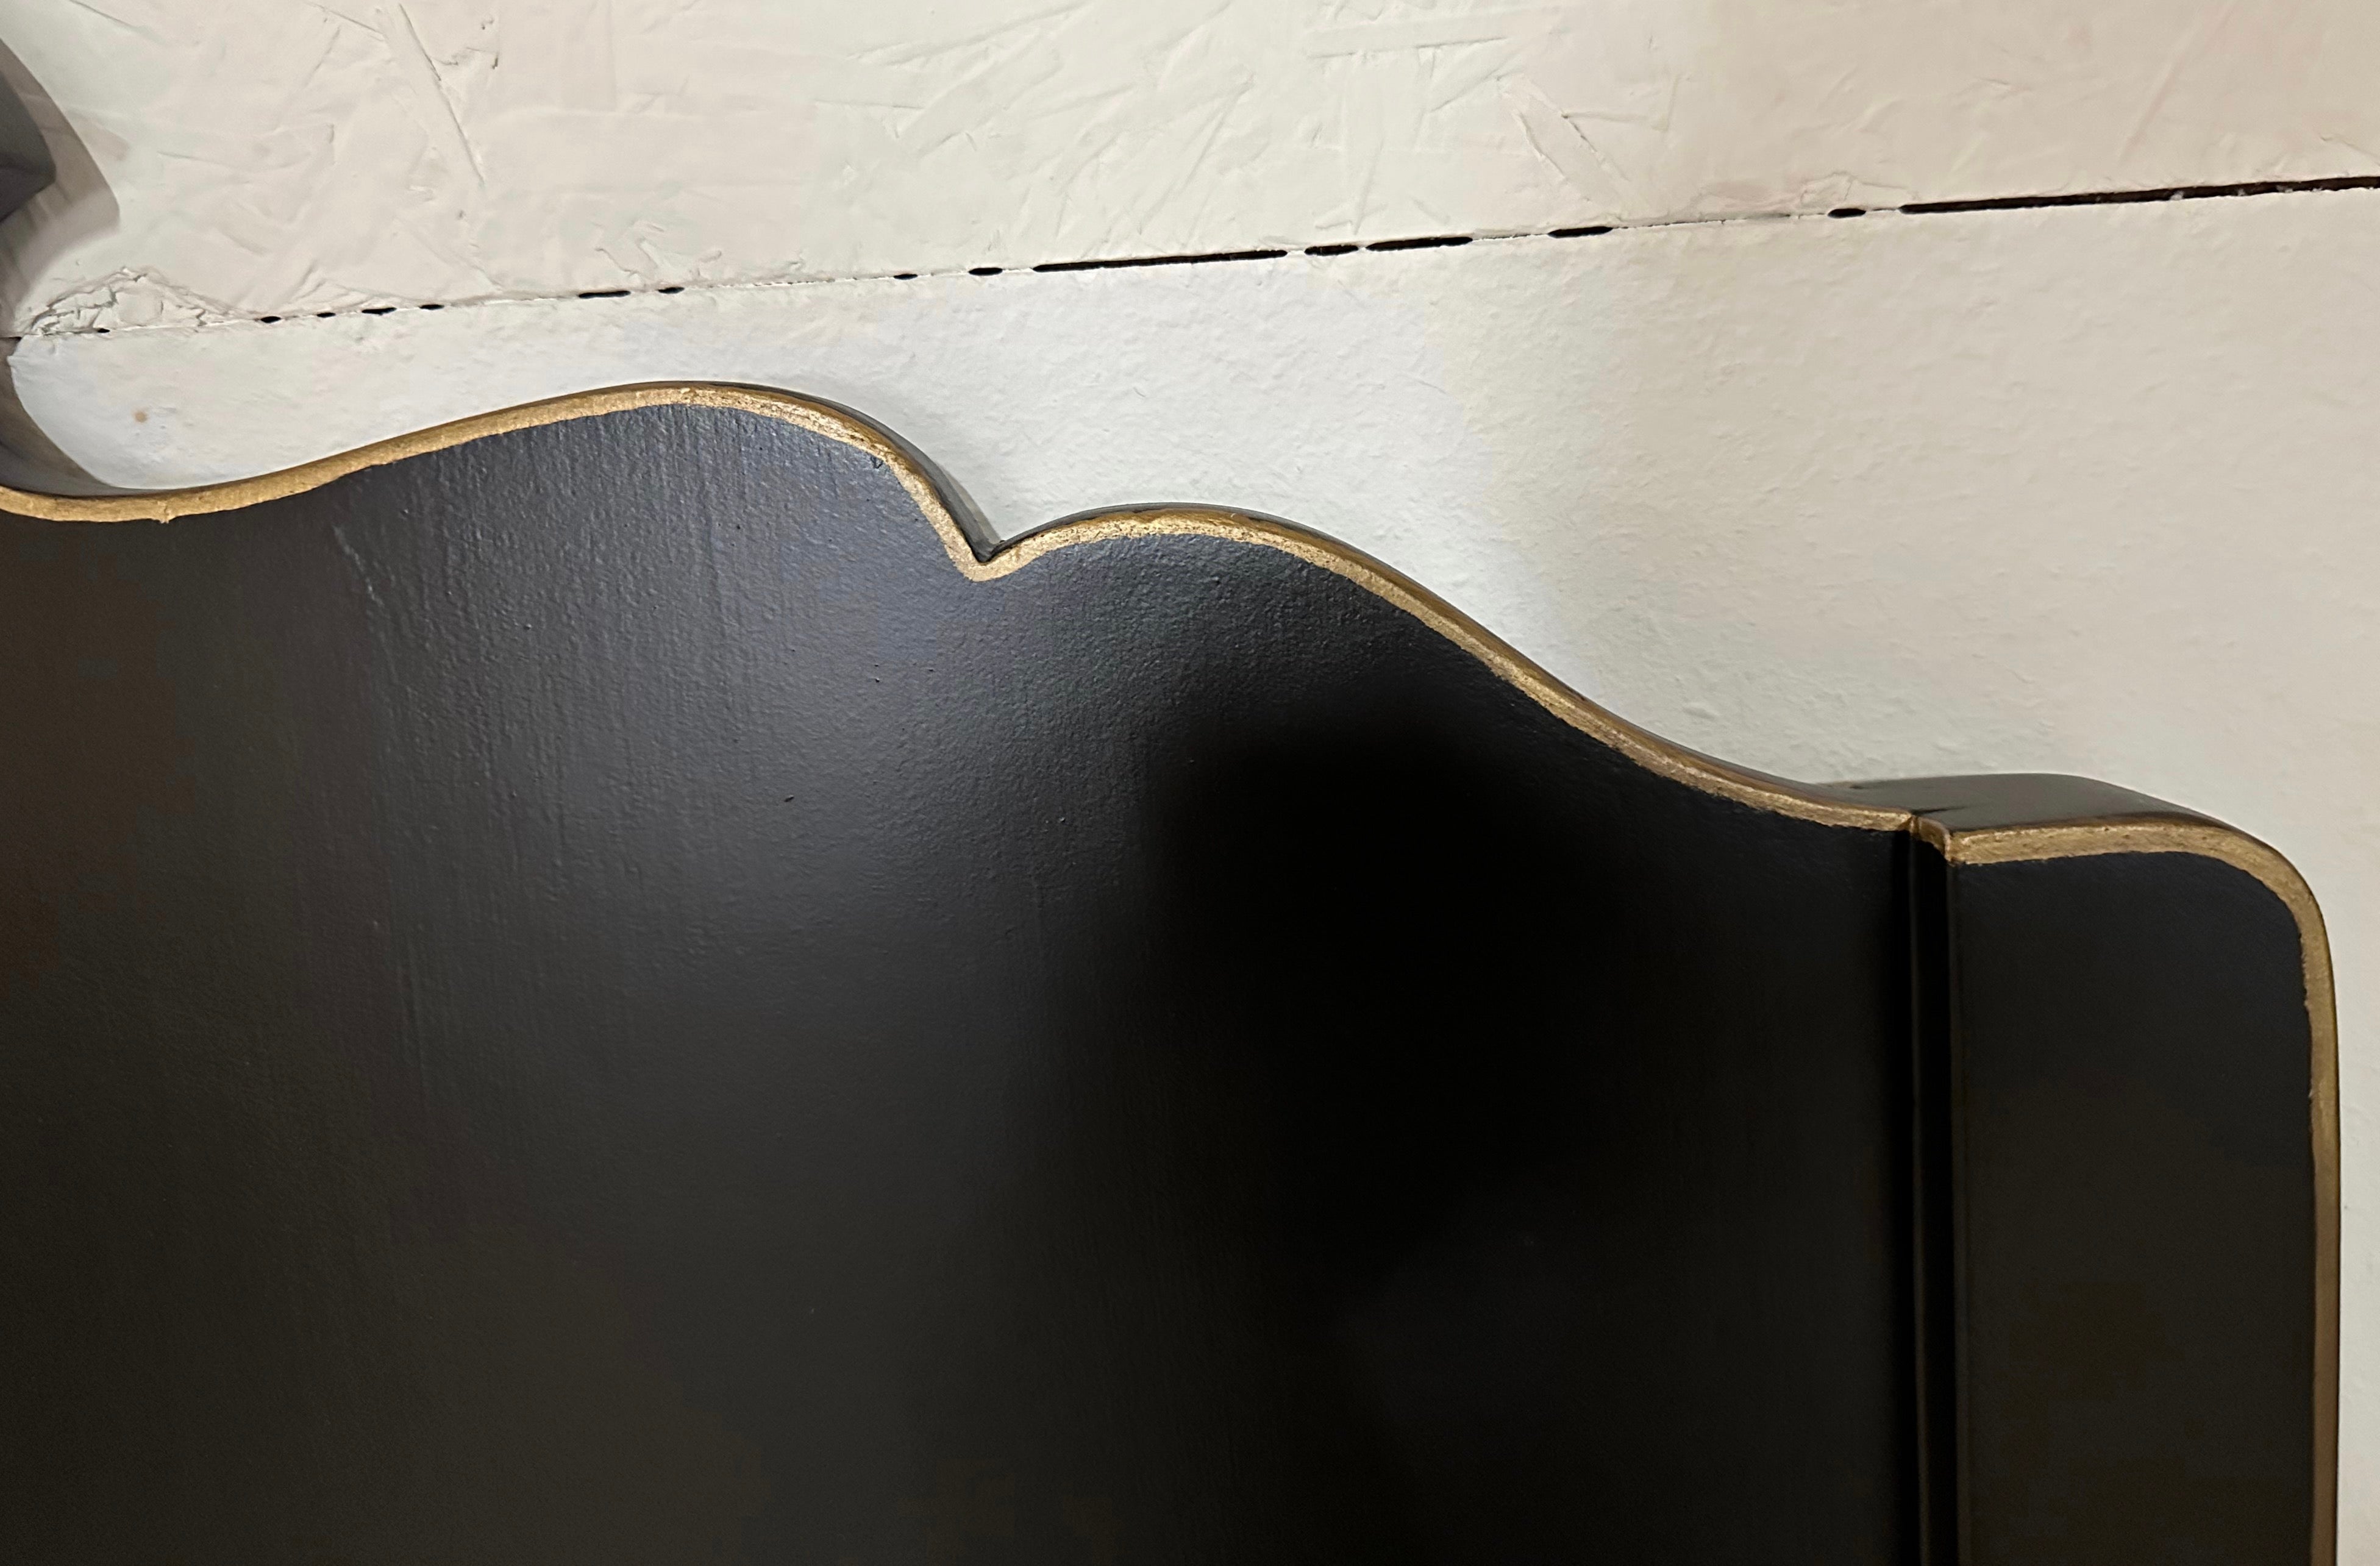 The pair of twin size vintage Venetian style headboards are painted a black matte finish, bordered with gold trim on wood will give an elegant finish to any bedroom.
Search terms: Mid-Century Modern, Hollywood Regency, neoclassical, classical